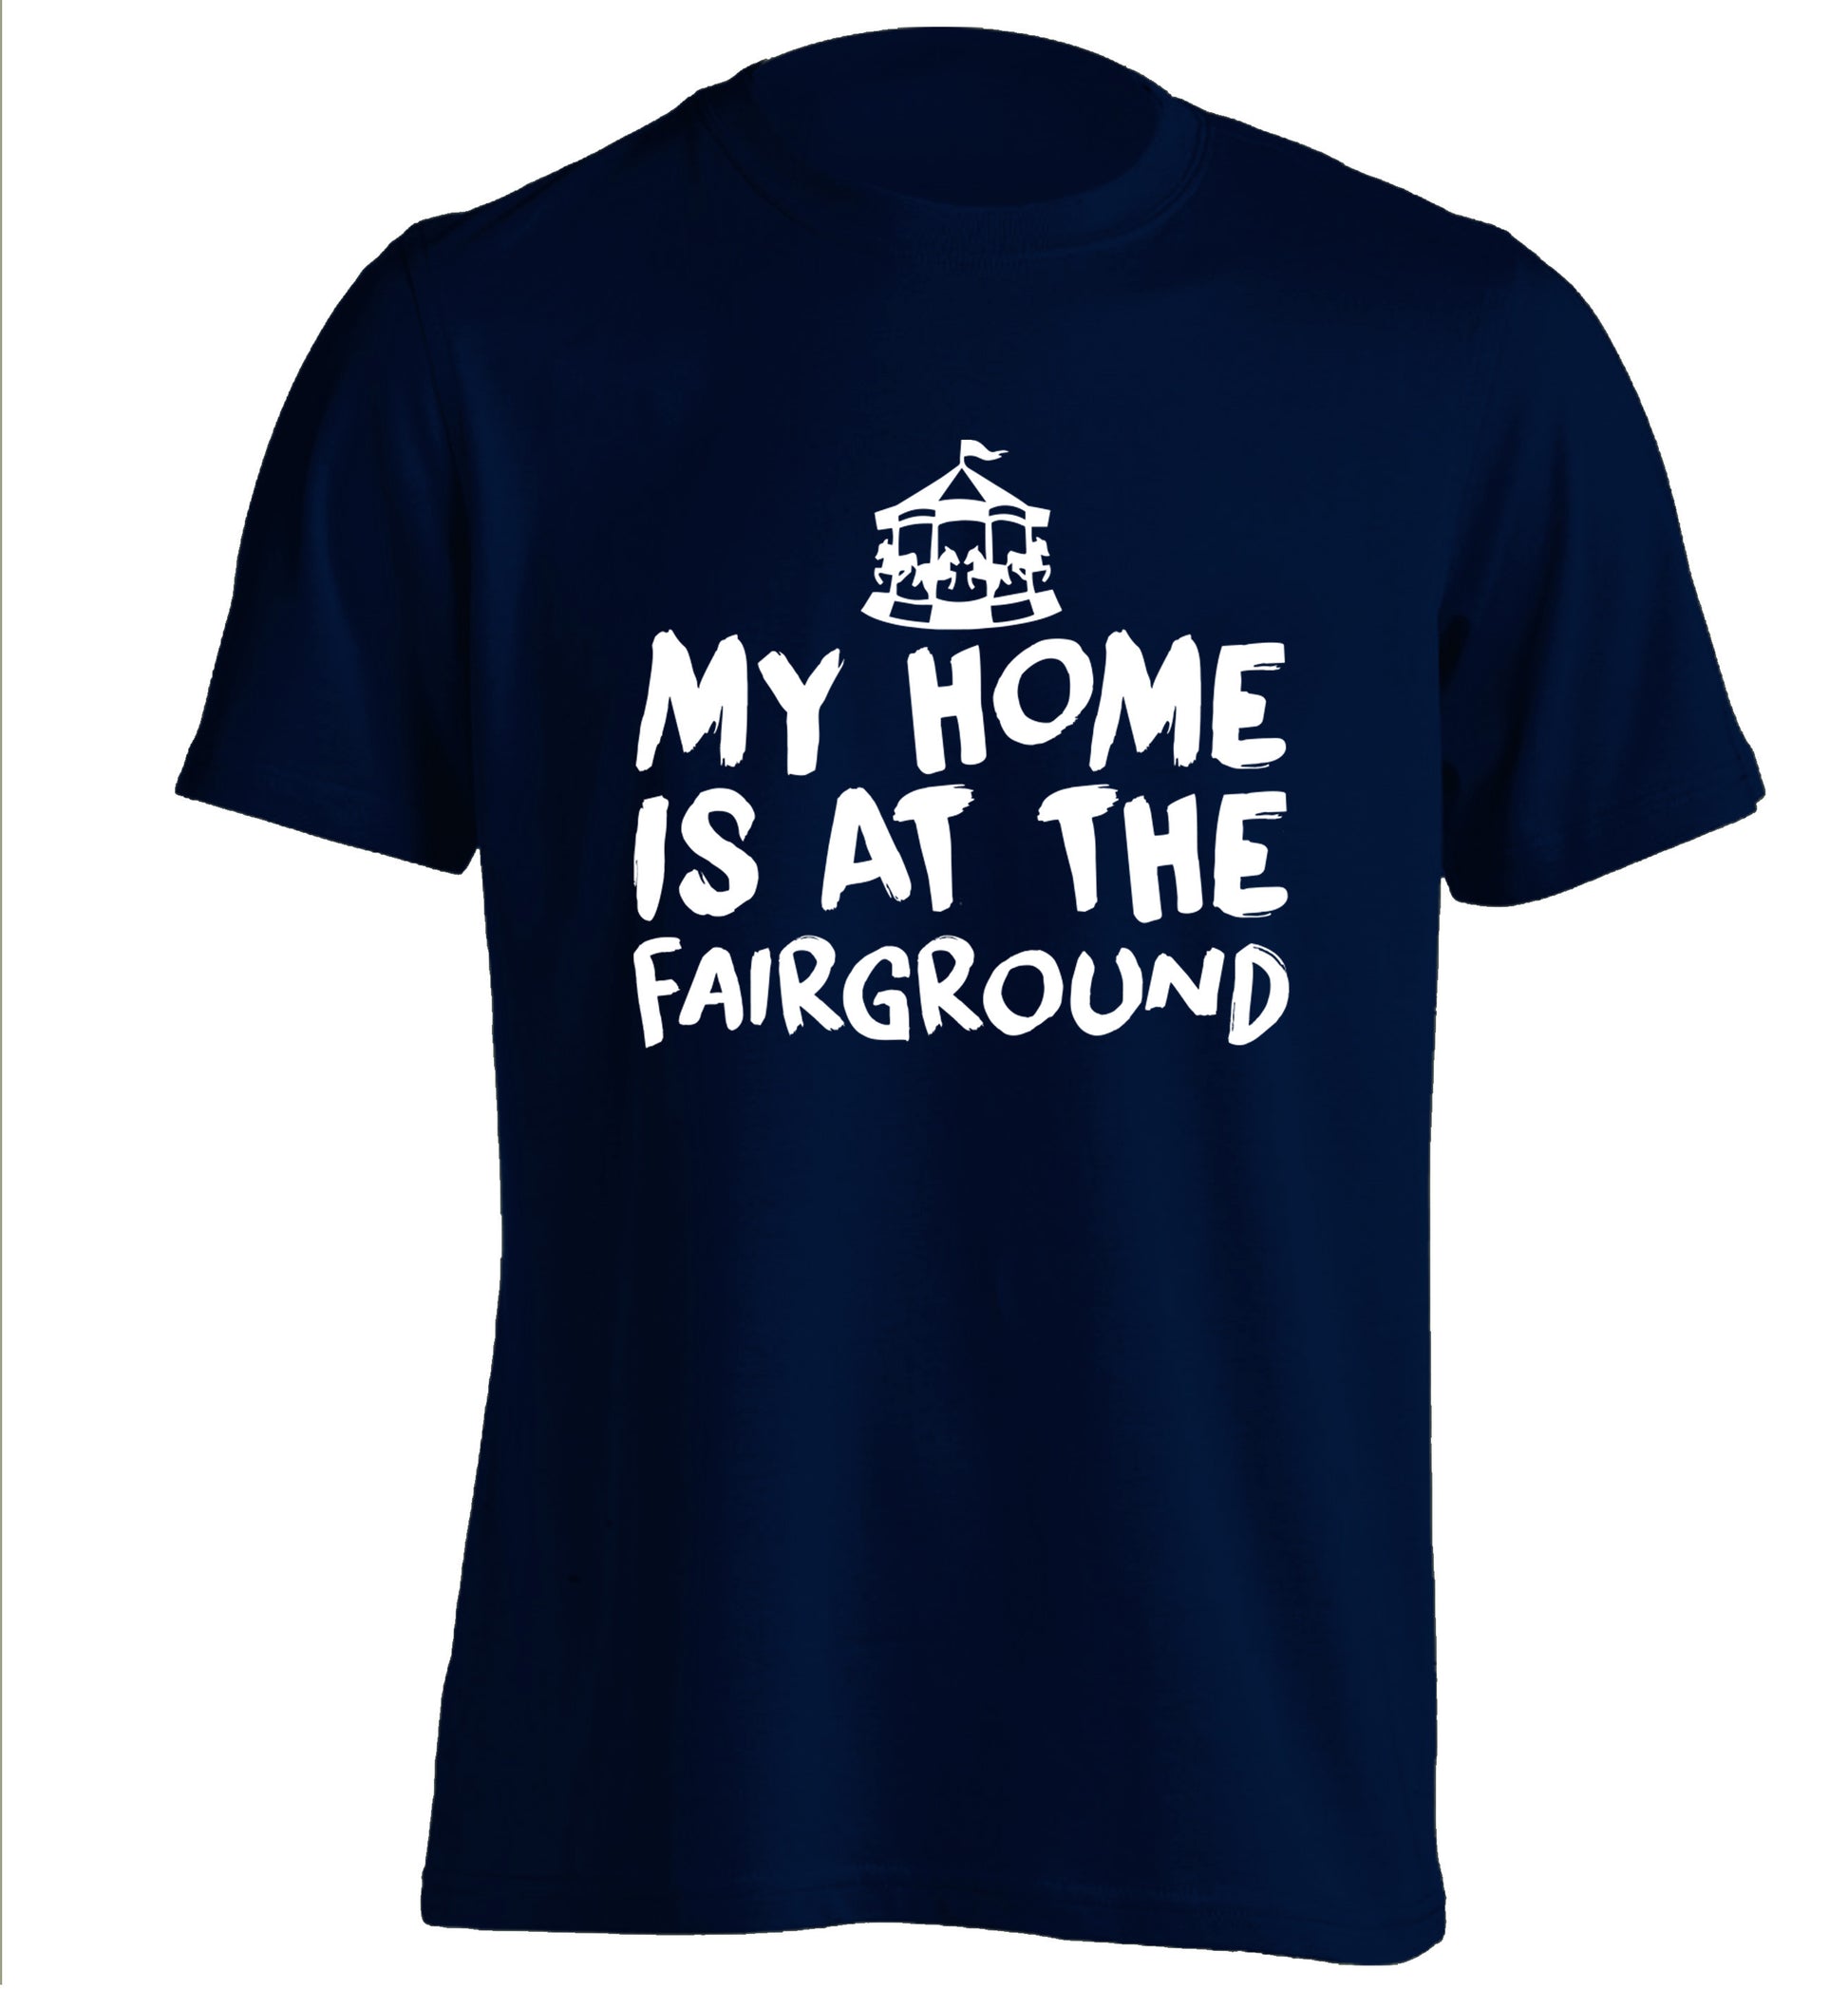 My home is at the fairground adults unisex navy Tshirt 2XL